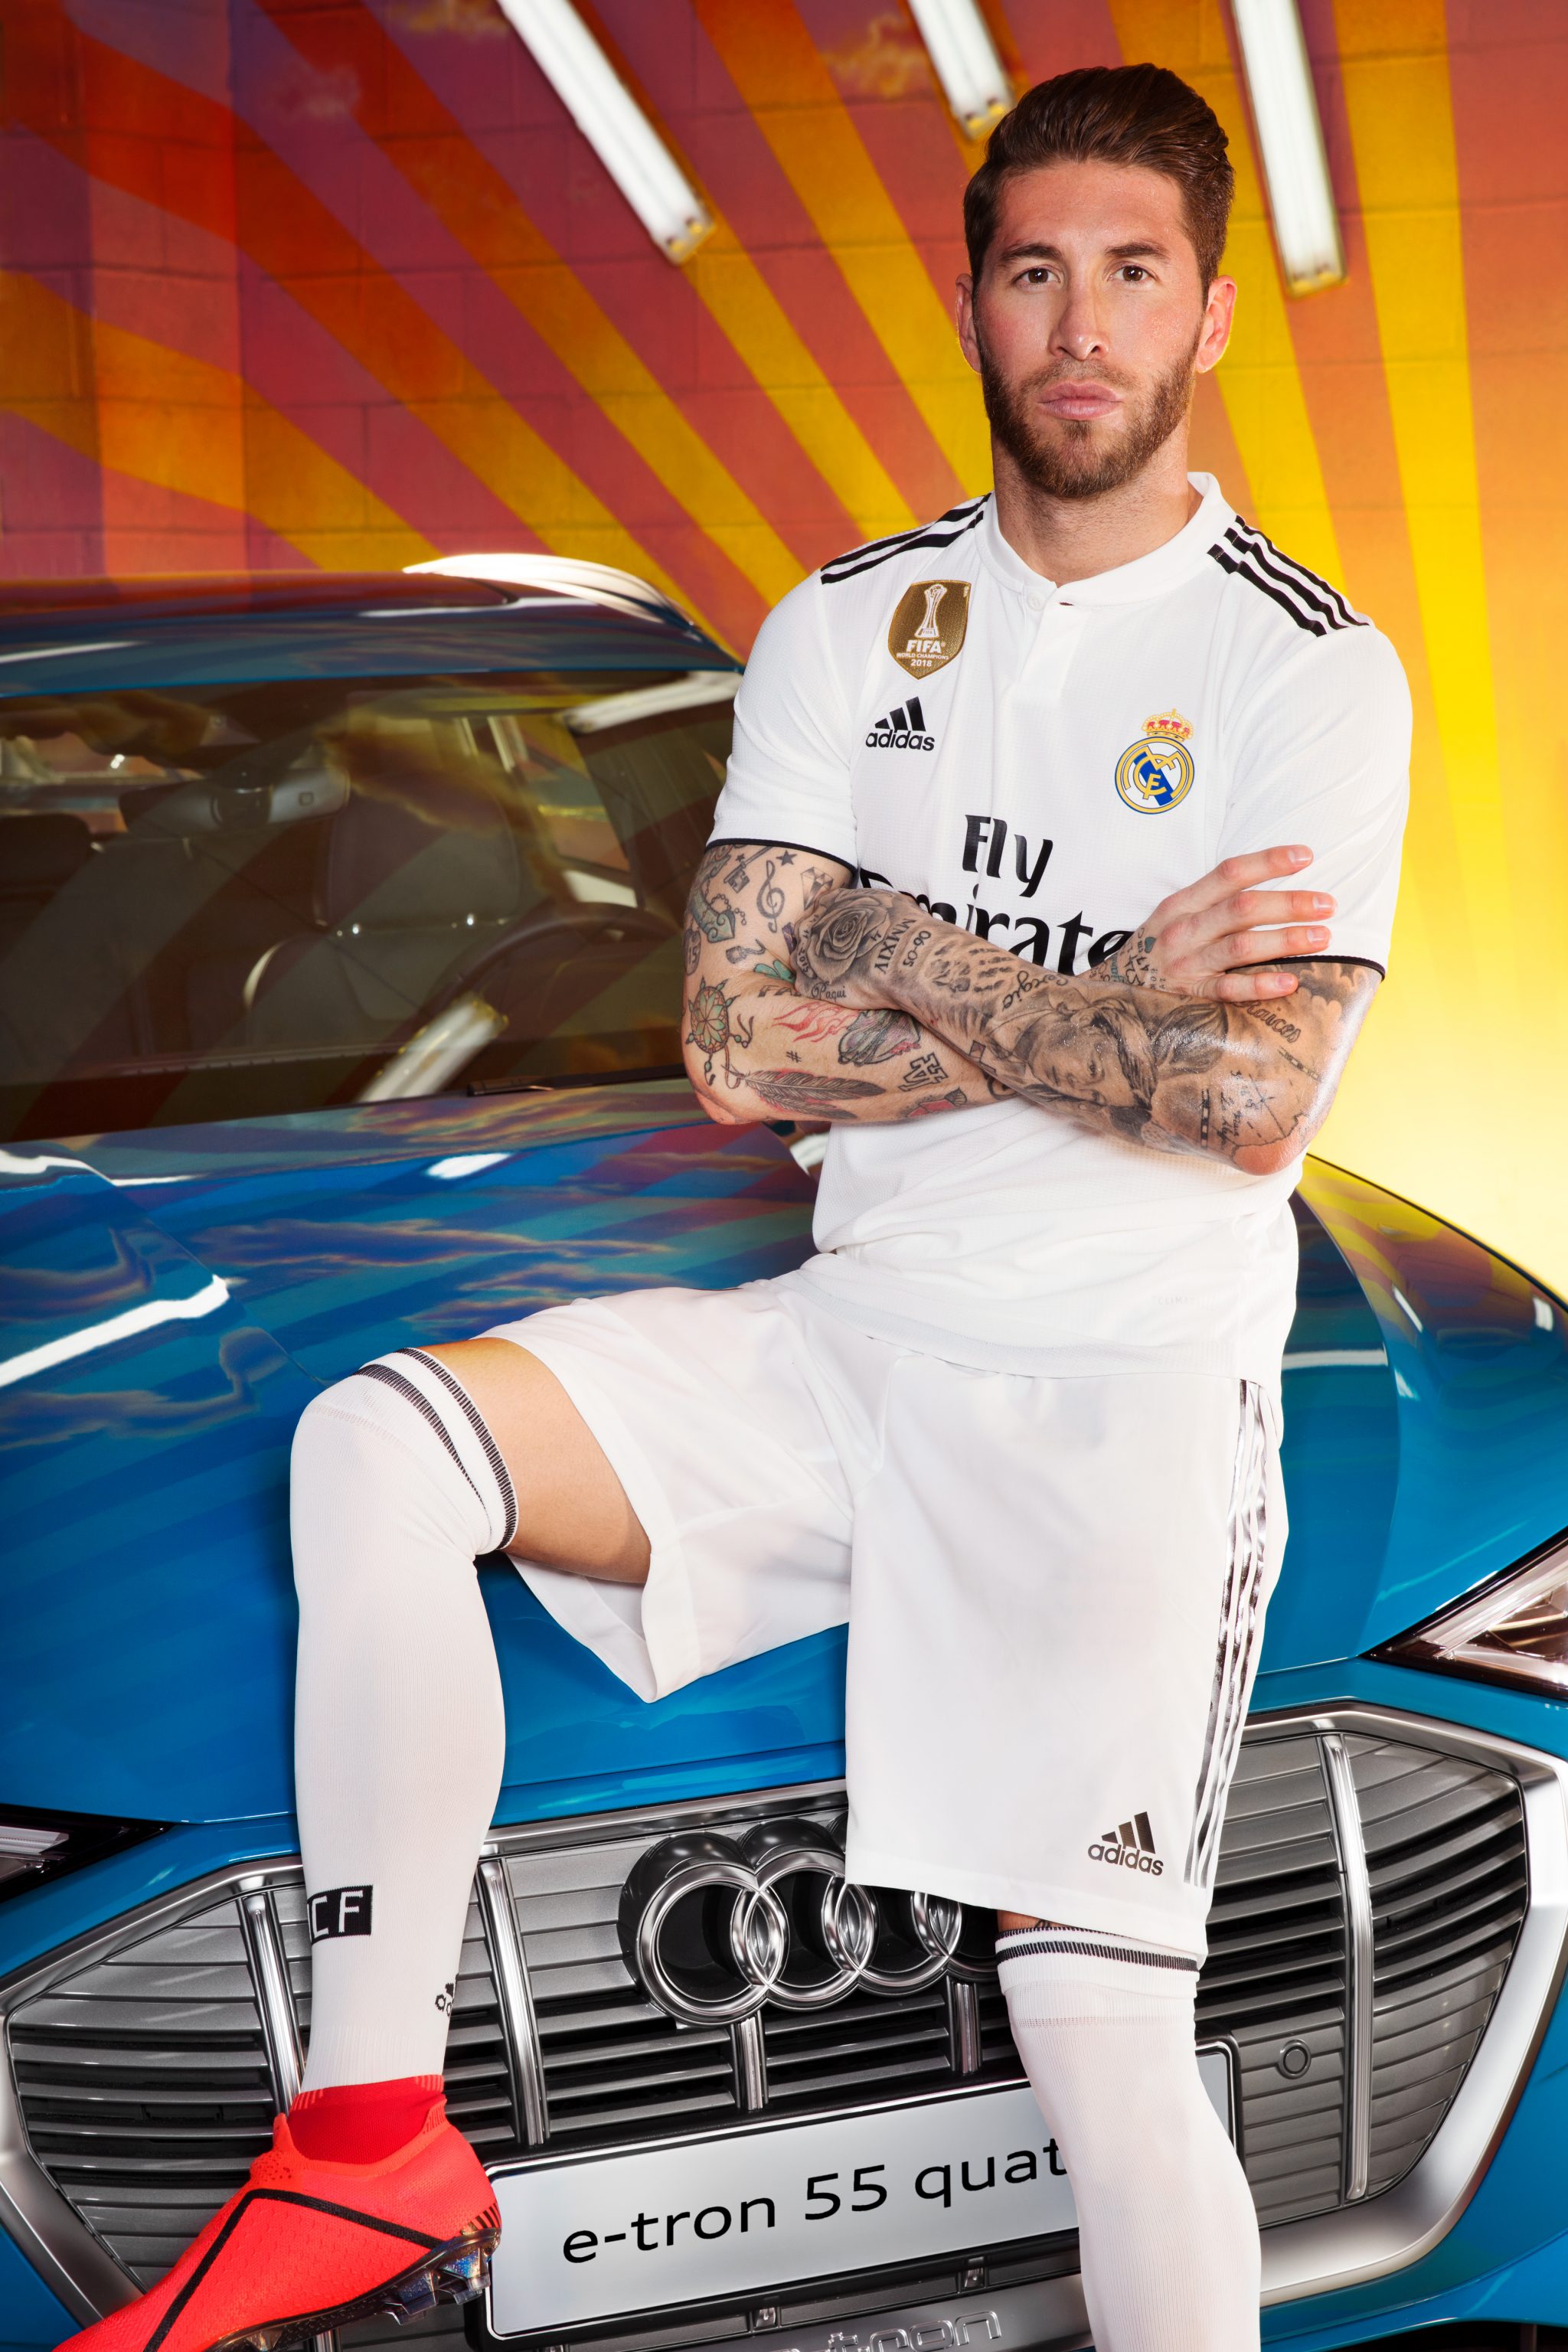 David LaChapelle | Audi x Real Madrid | David LaChapelle photographed the portraits of individual players of the Real Madrid Football team for the launch of Audi E-tron. | 2